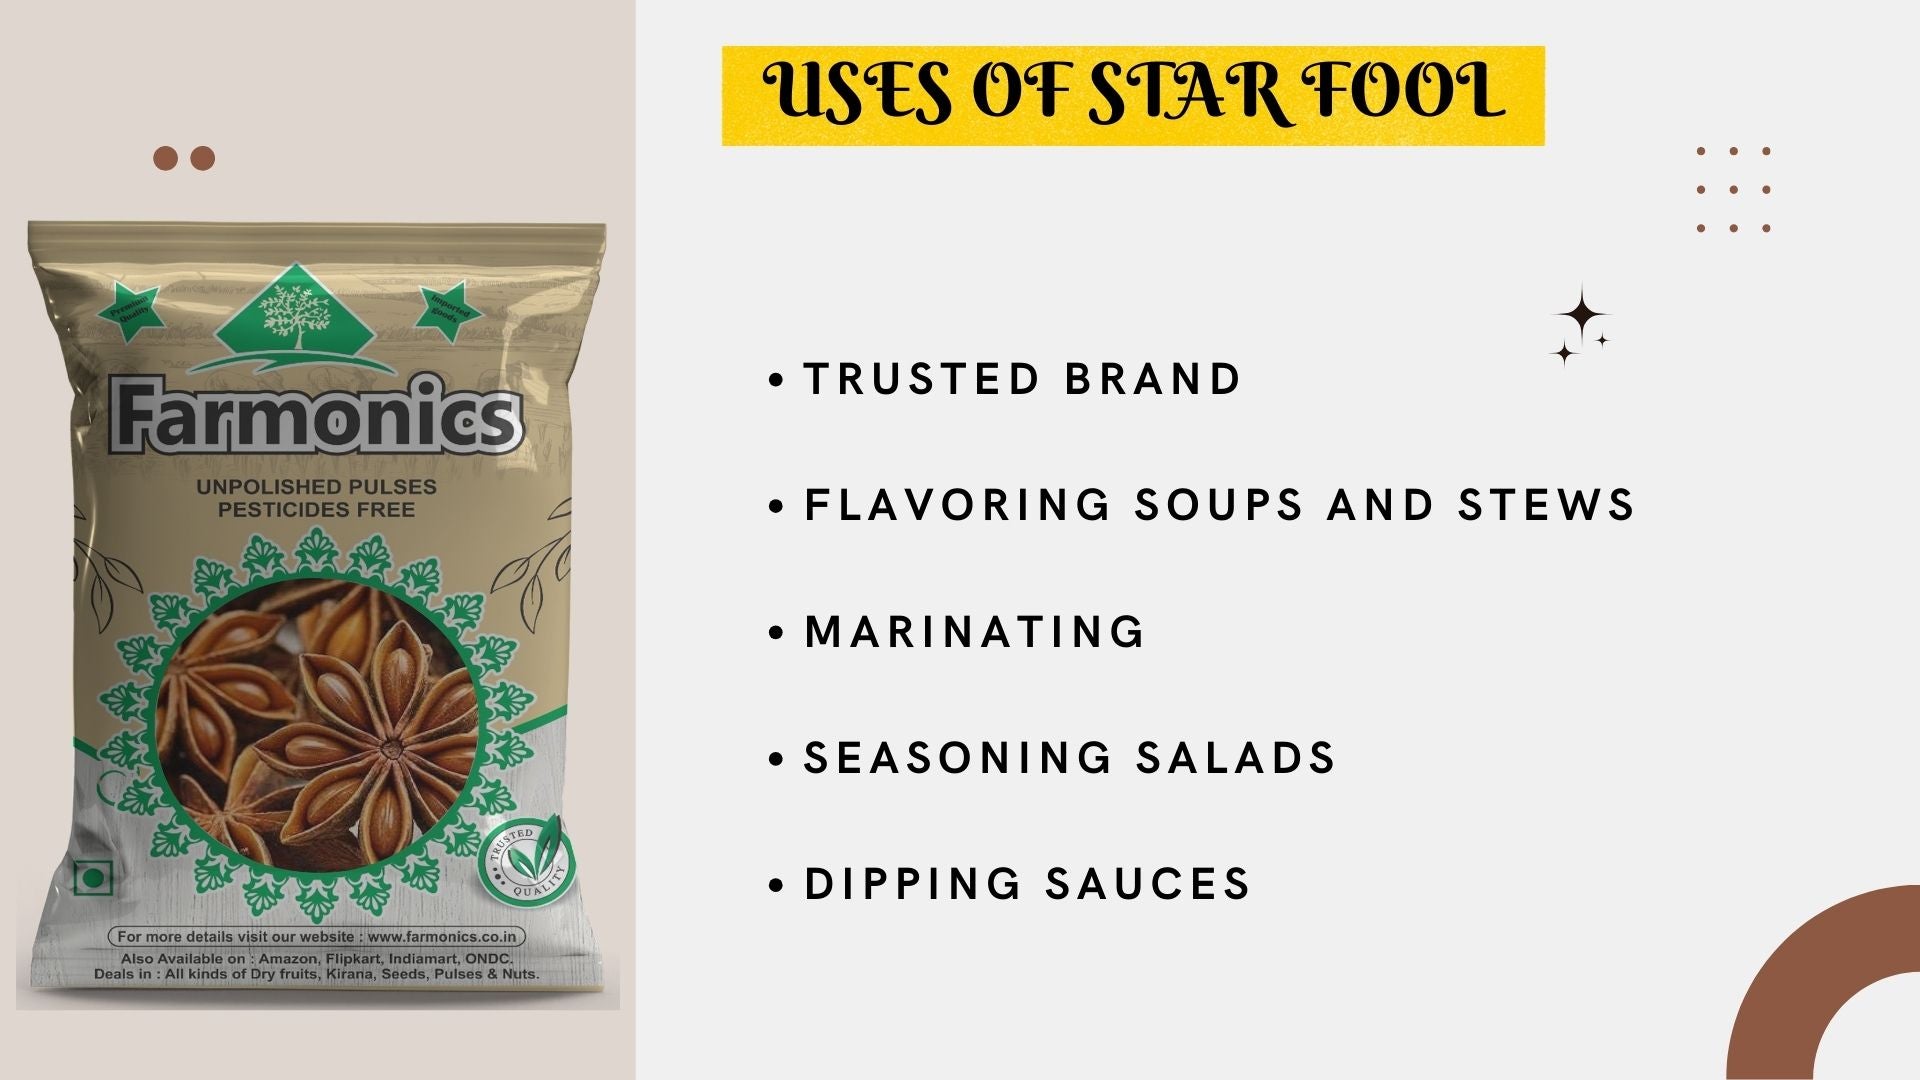 heer are list of uses of Star fool